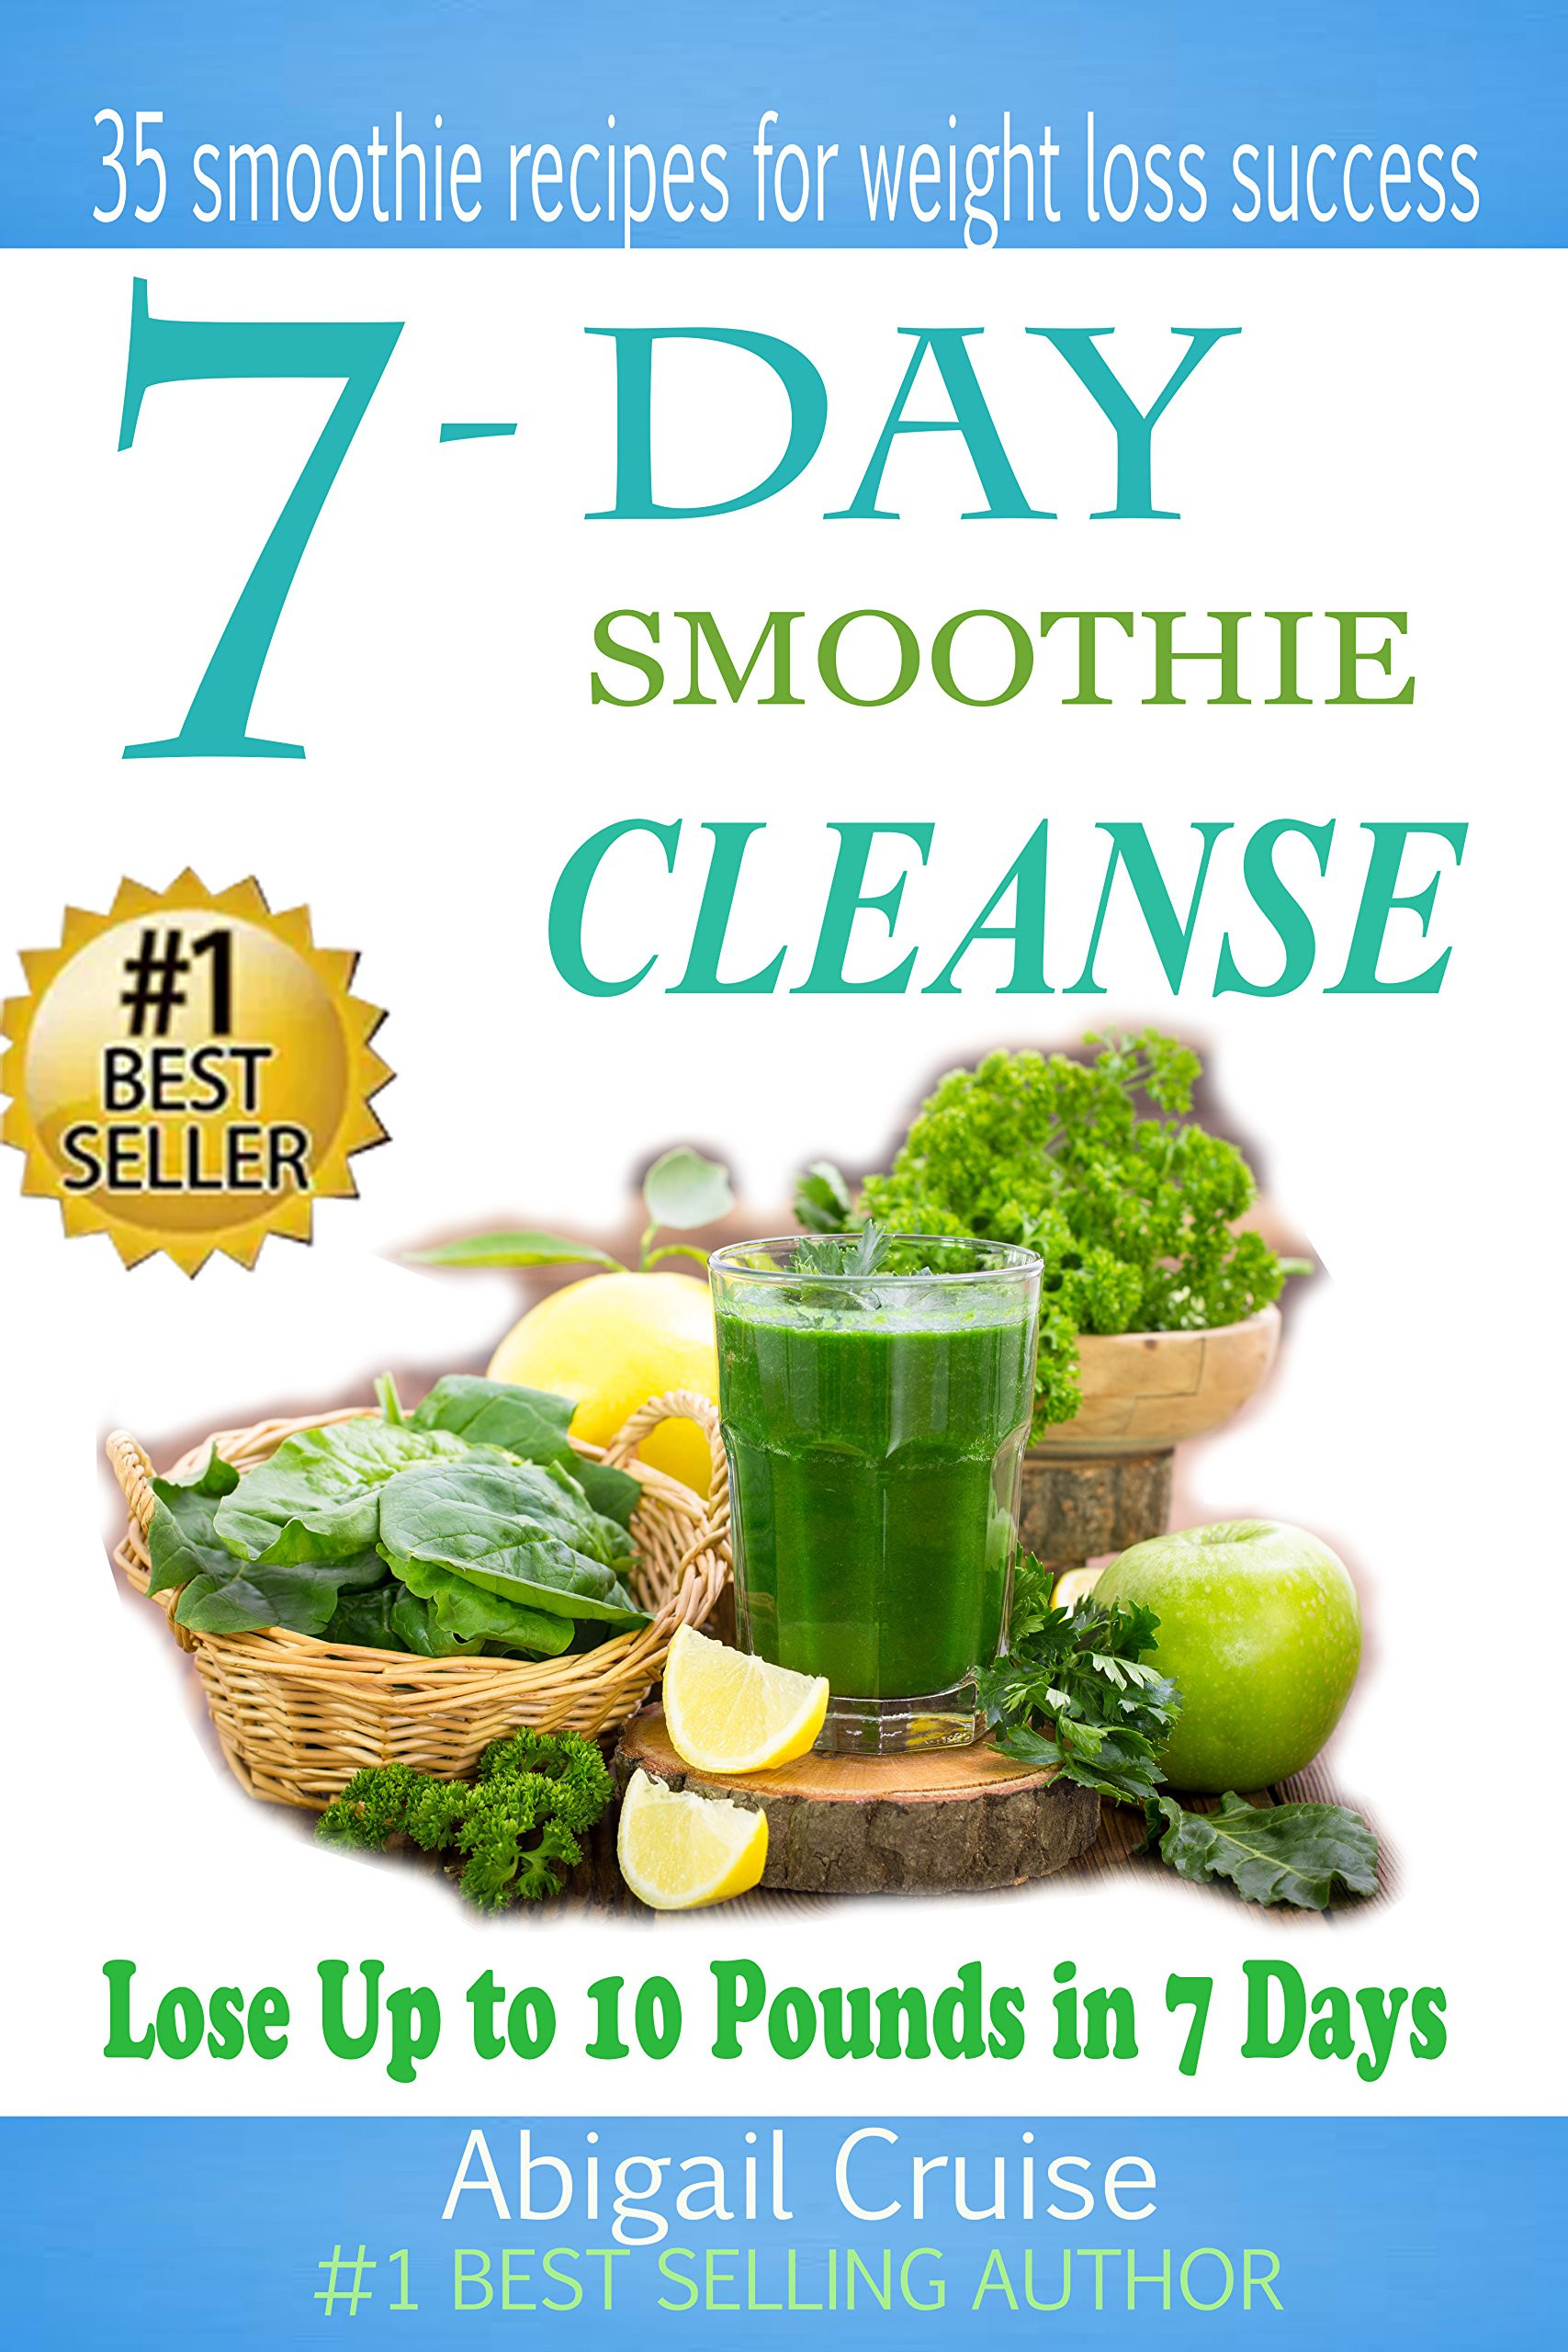 Green Smoothie Recipes For Weight Loss
 40 Green Smoothie Recipes For Weight Loss And Detox Book